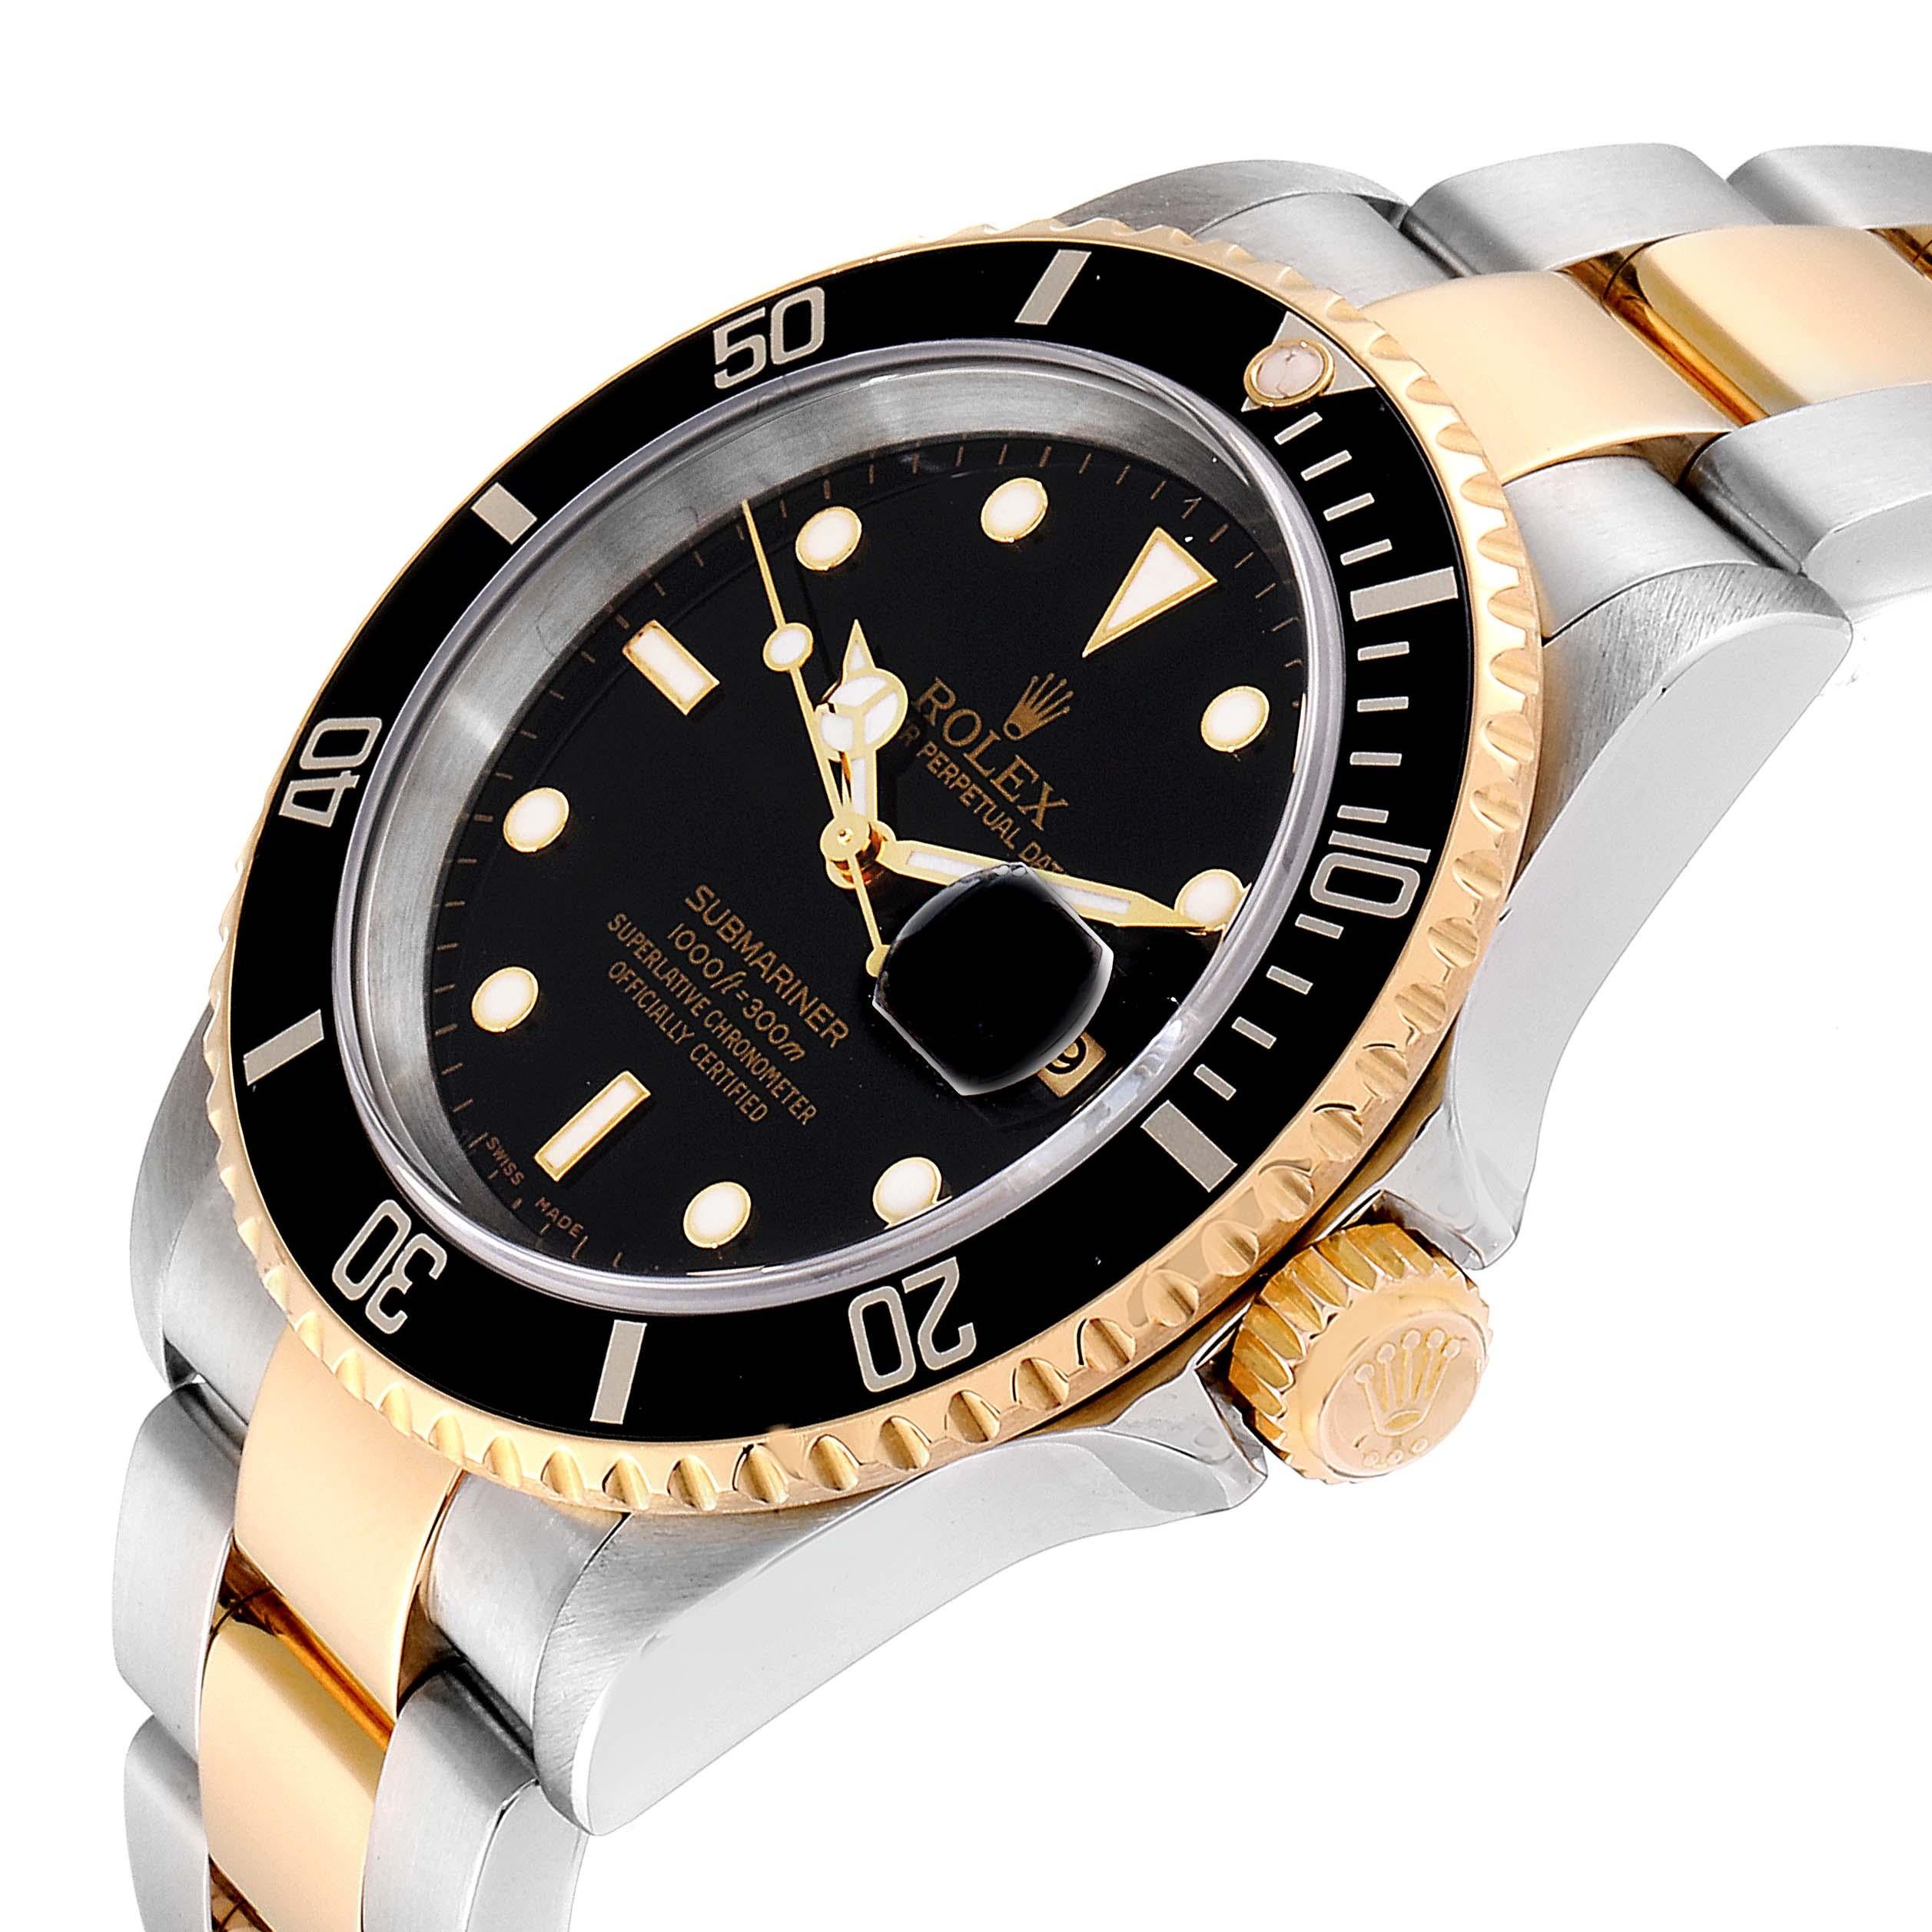 Rolex Submariner Date Steel Yellow Gold Men's Watch 16613 Box Papers 2